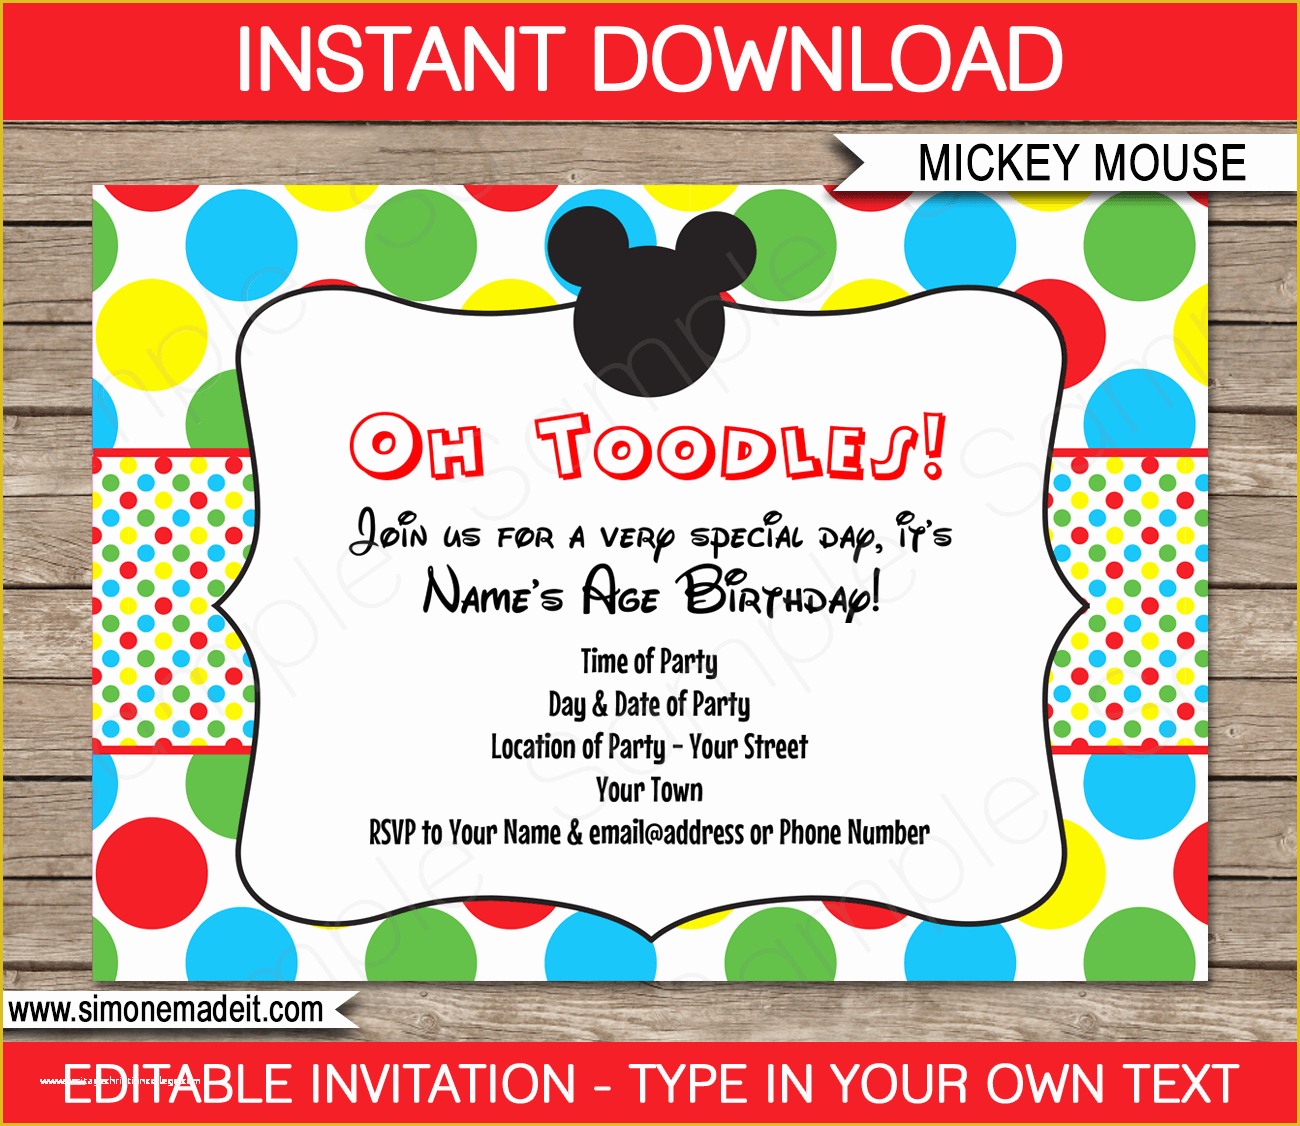 80's theme Party Invitation Templates Free Of Mickey Mouse Party Invitations Template